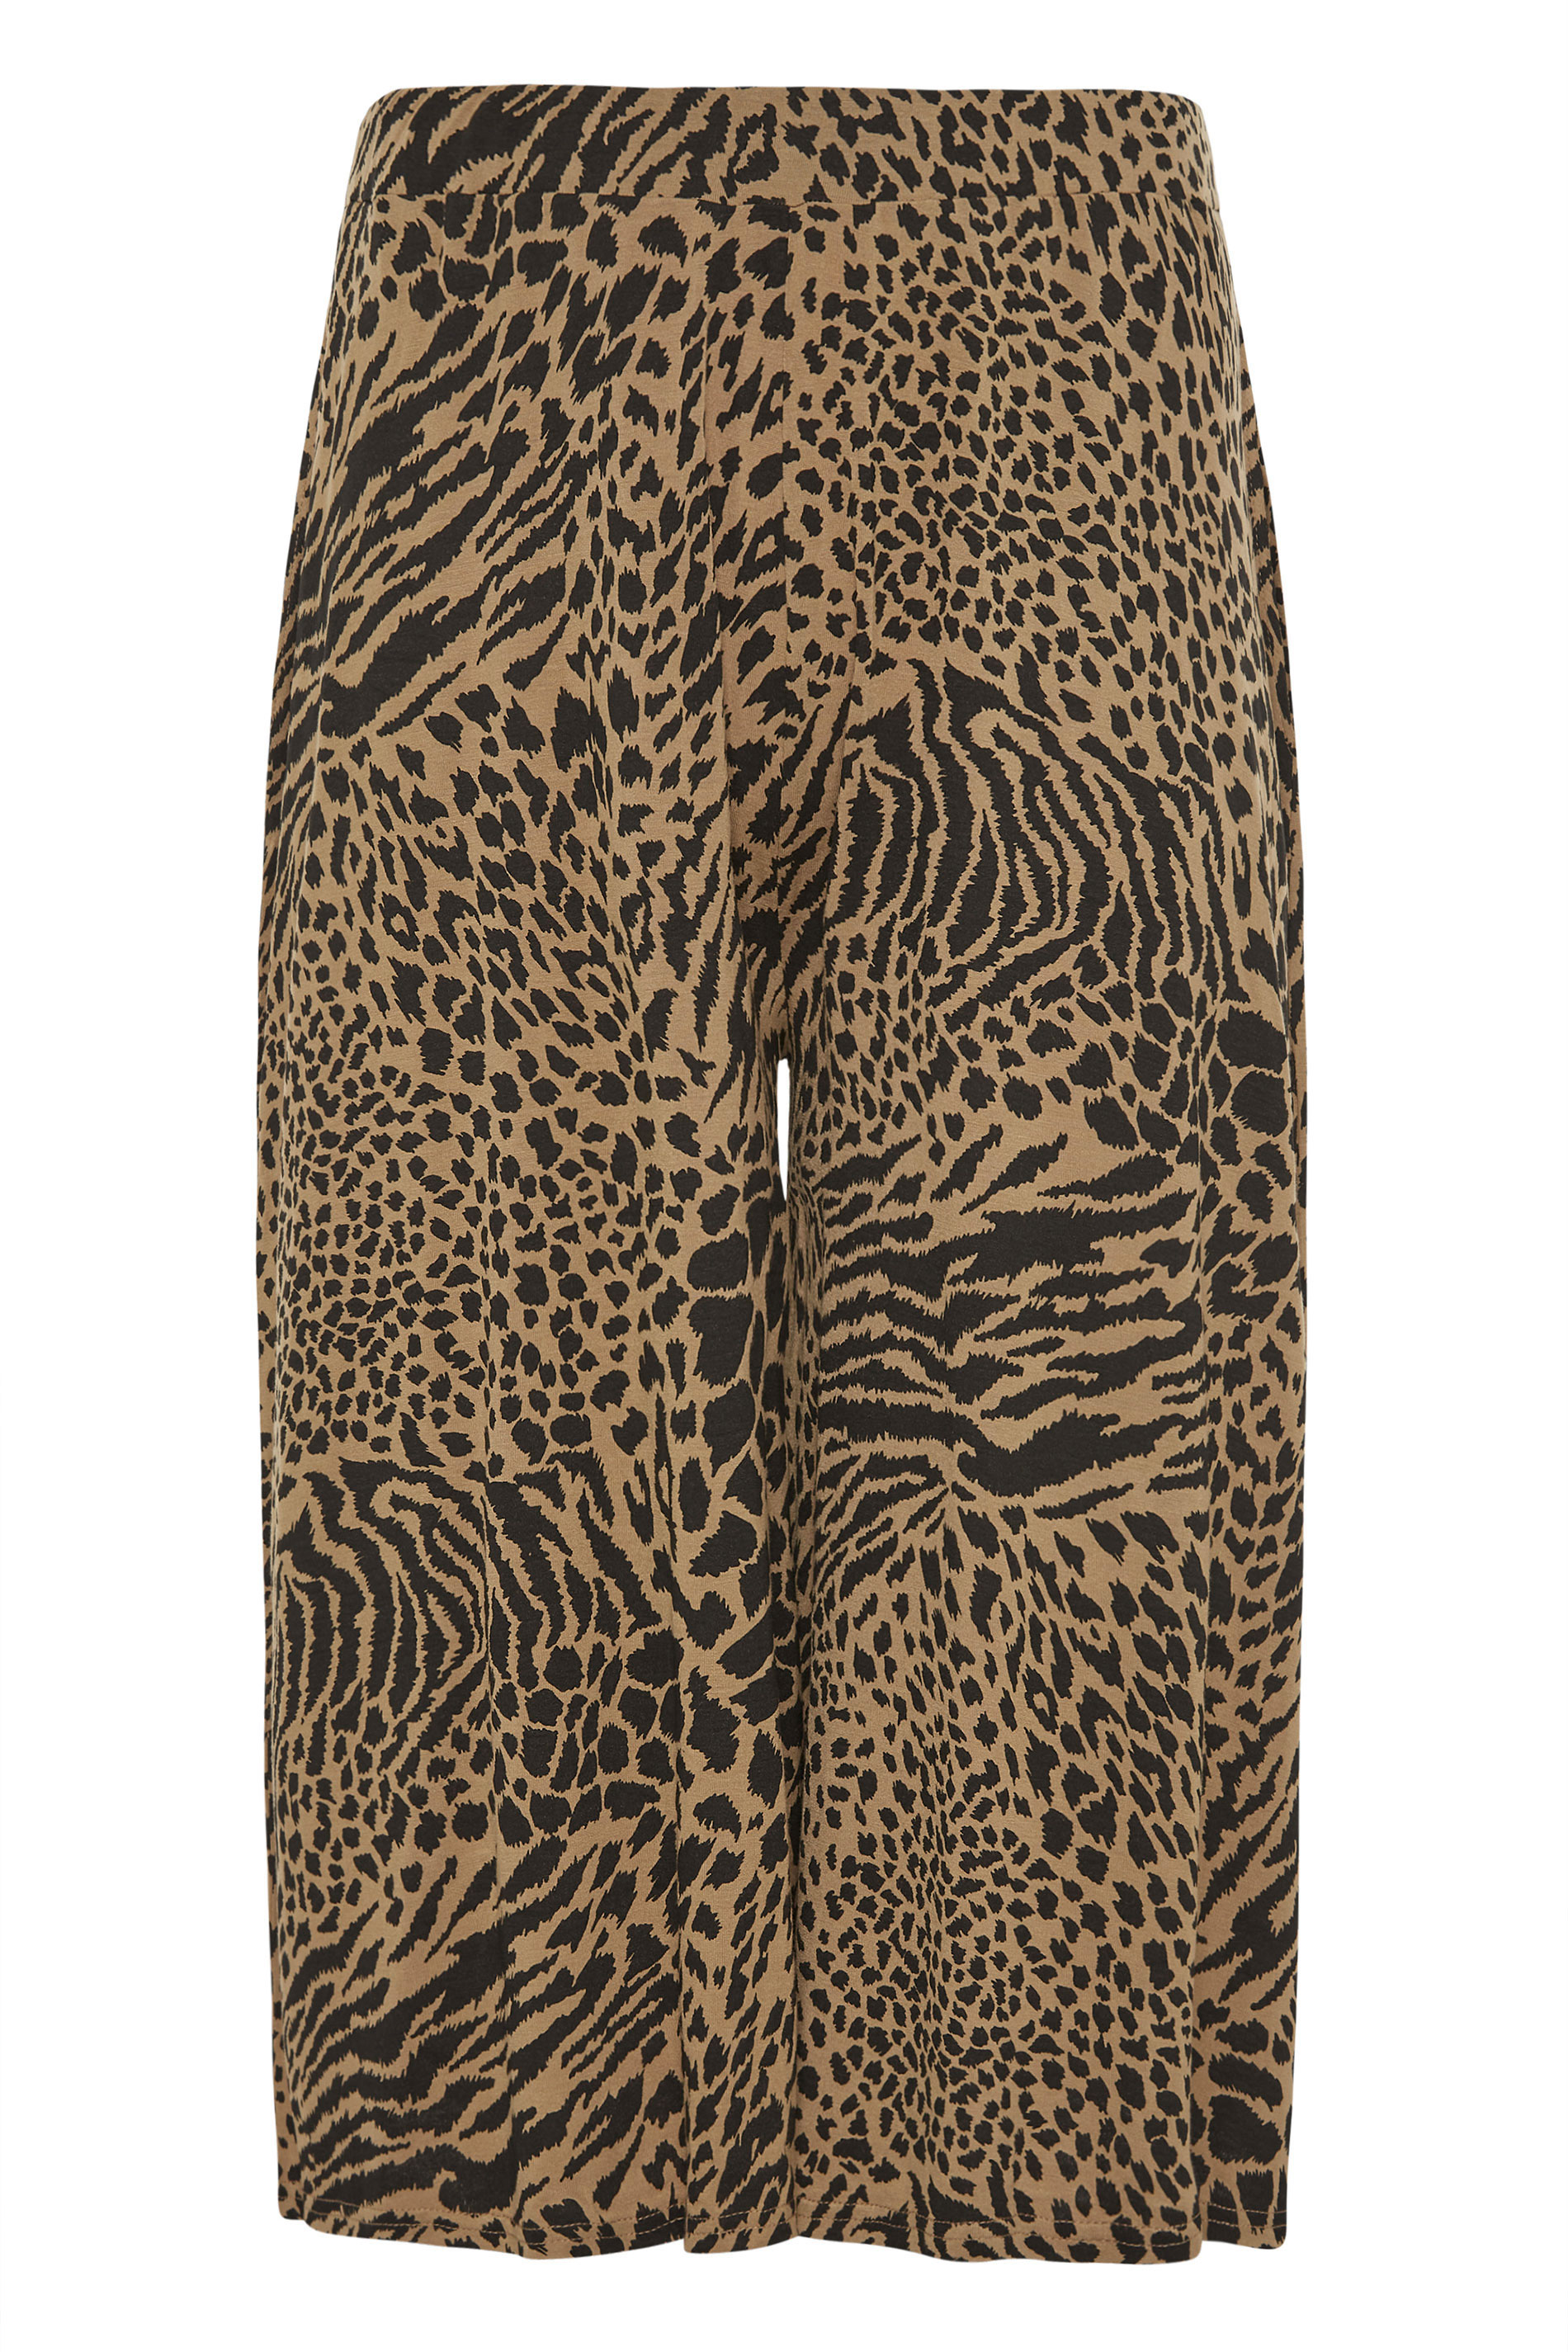 Brown Animal Print Culottes | Yours Clothing